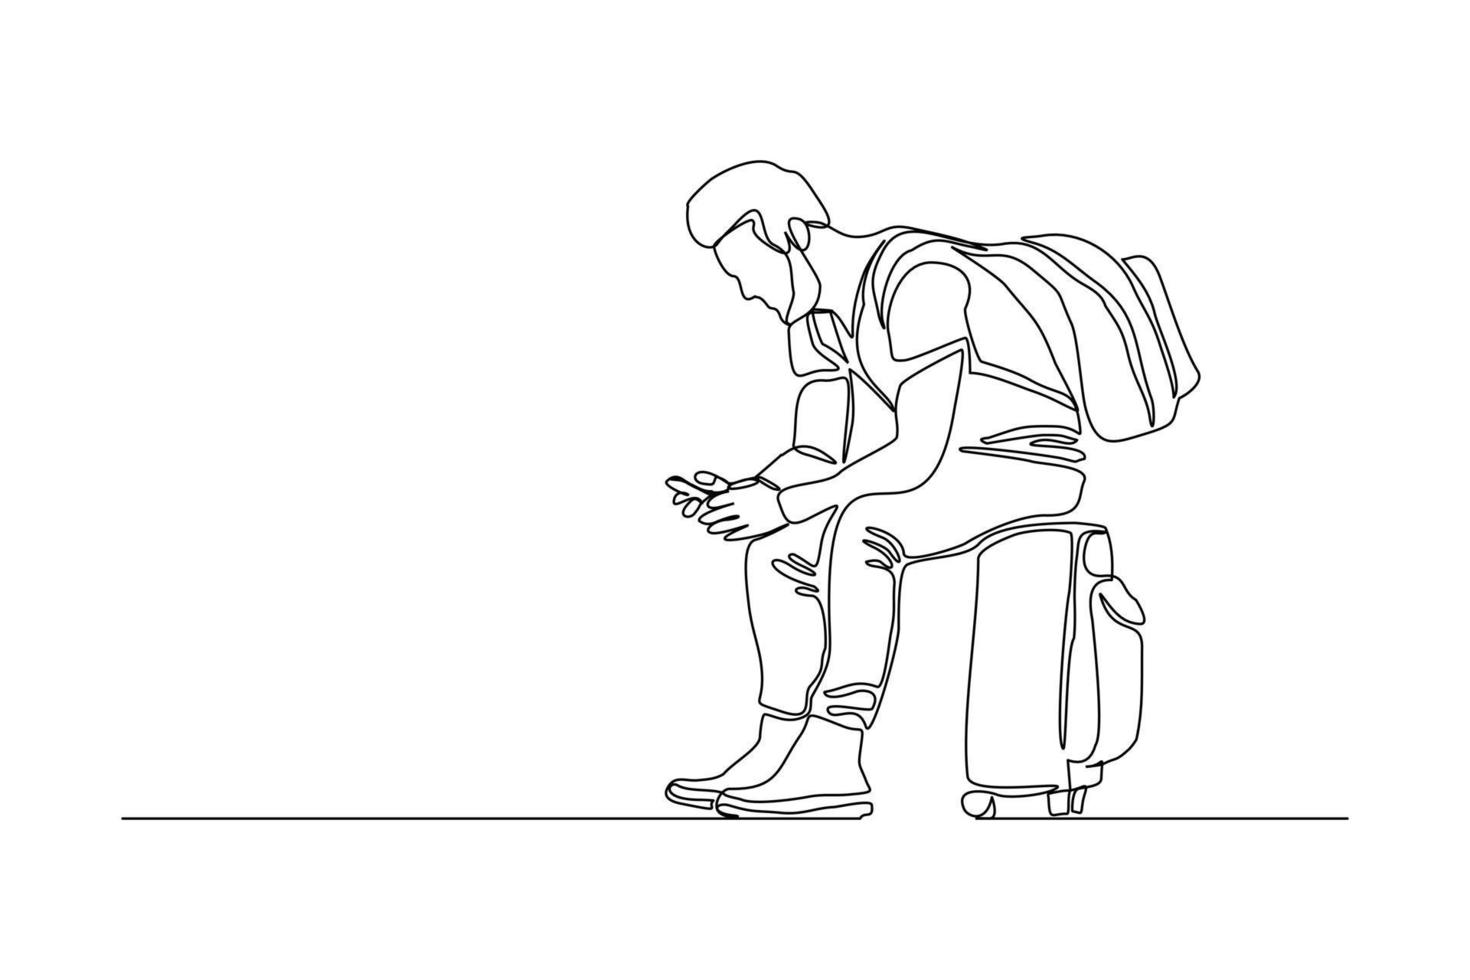 Continuous line drawing of traveler man sitting with luggage. Single one line art concept of tourist walking with suitcase. Vector illustration